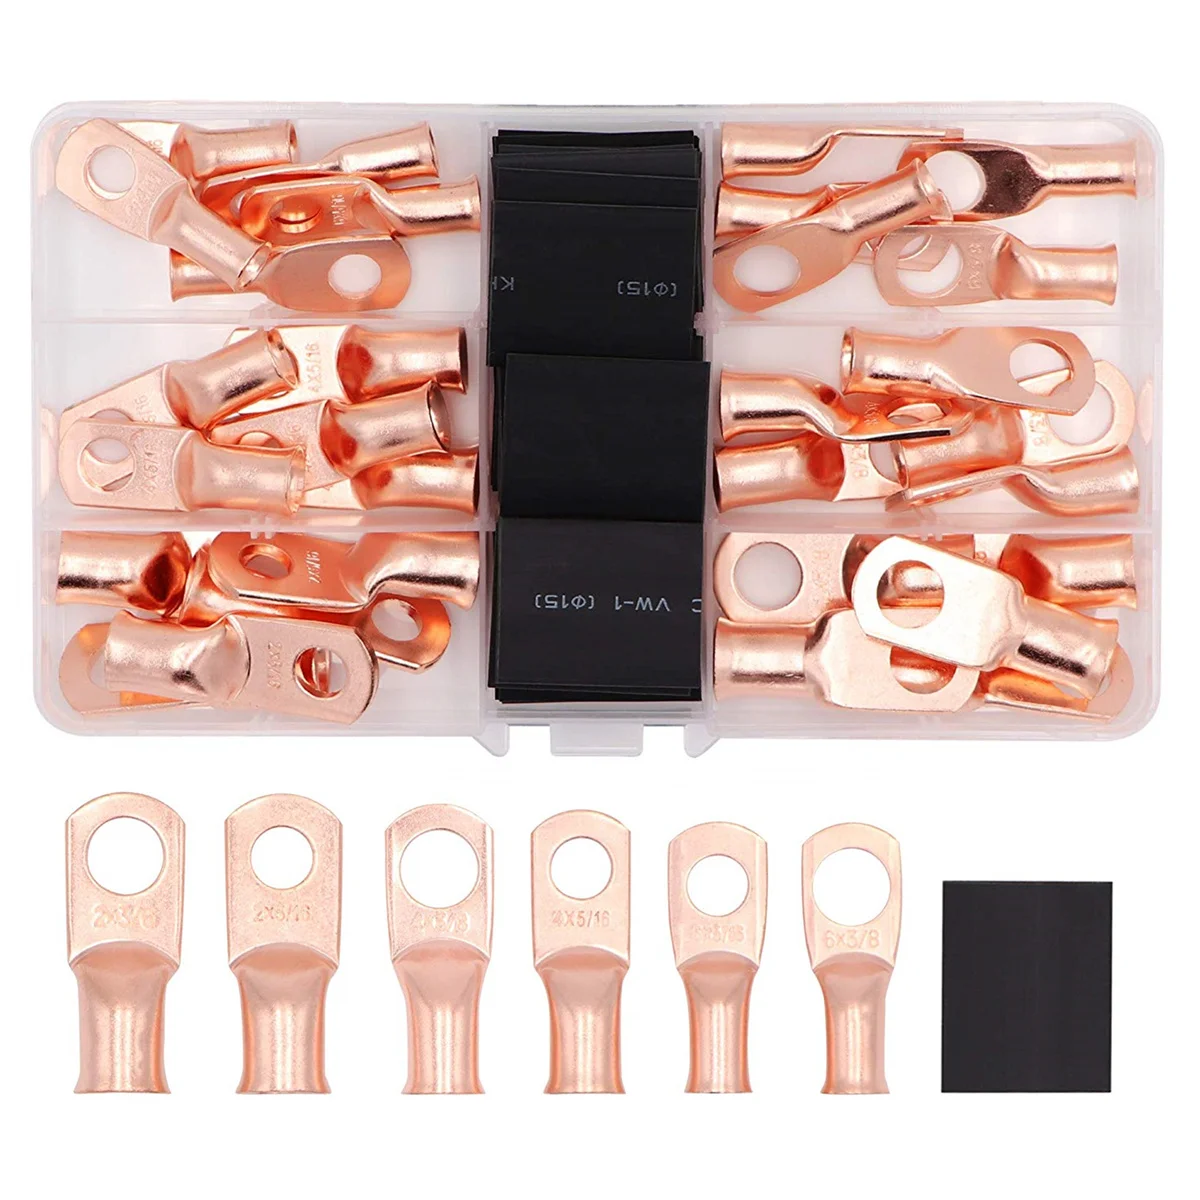 

60PCS Copper Wire Lug Connectors Ring SC6-25 Bare Cable Electrical Crimp Battery Terminal SC Connector Kit with Shrink Tube